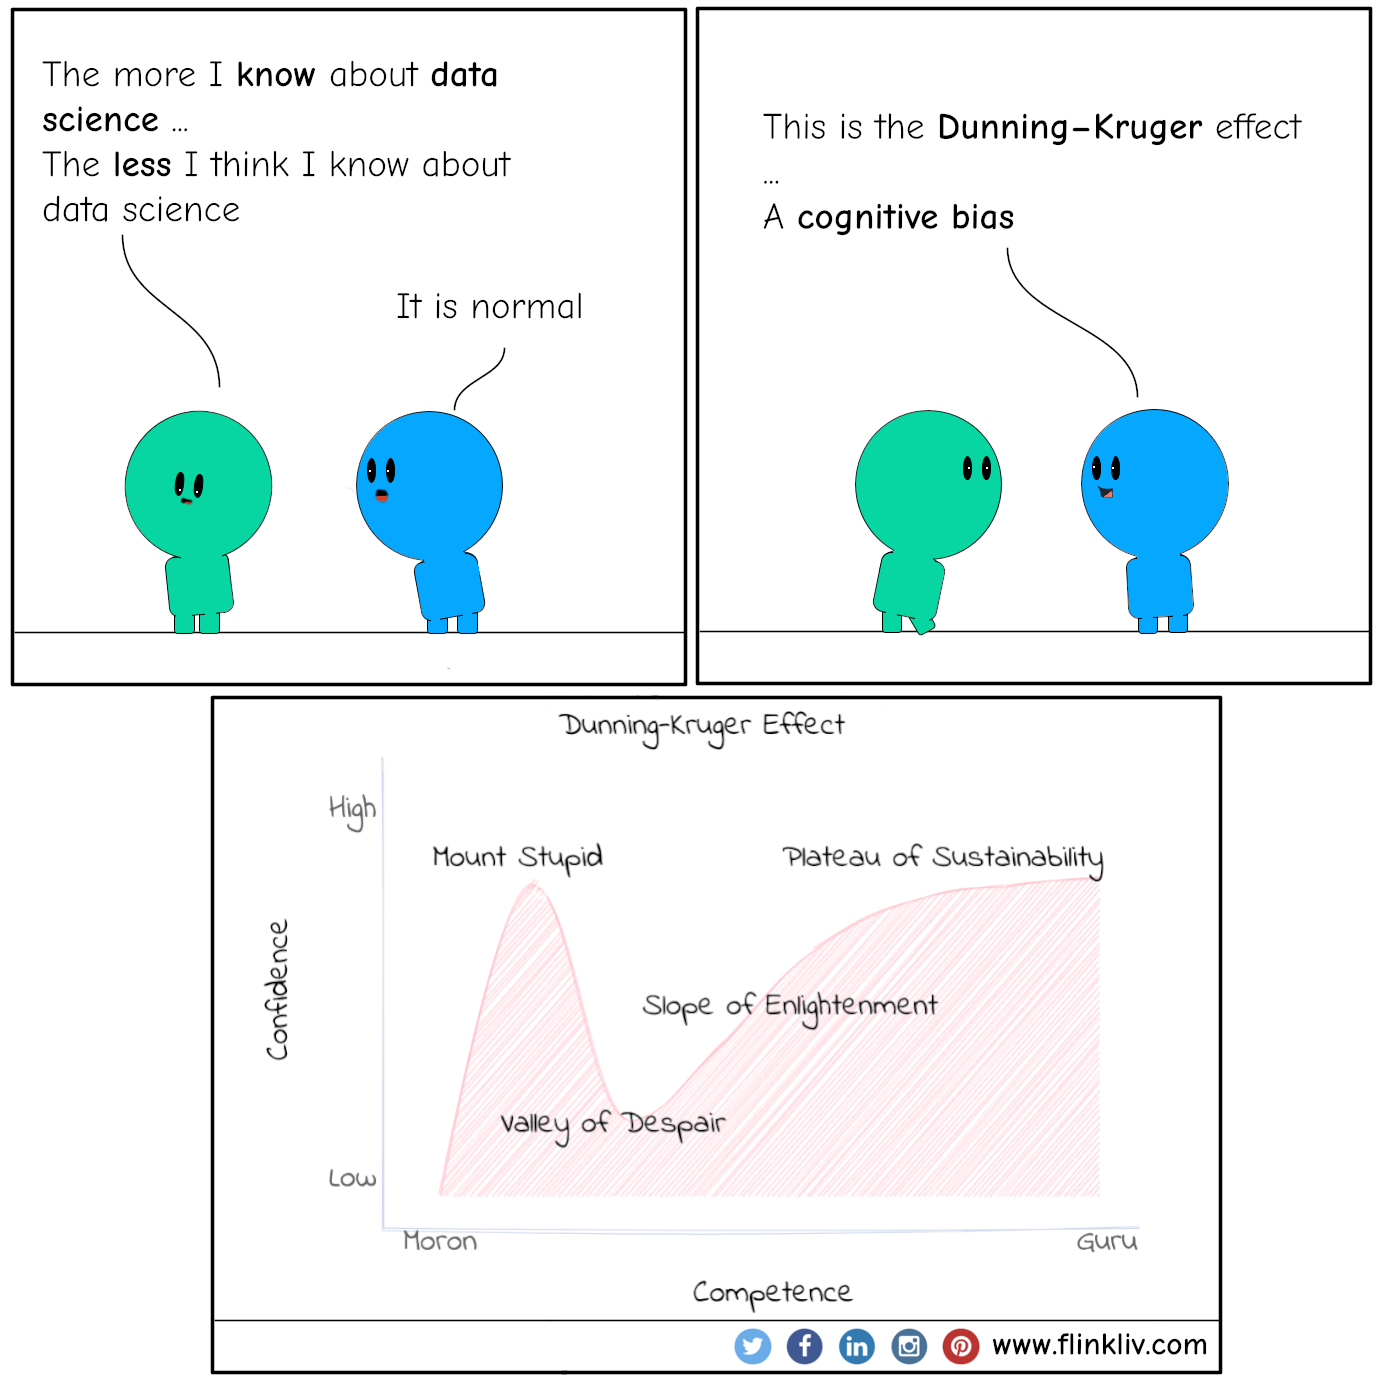 Conversation between A and B about the Dunning–Kruger-effect bias.
              A: The more I know about data science the less I think I know about data science
B: It is normal

B: This is the Dunning–Kruger effect, a cognitive bias.




              